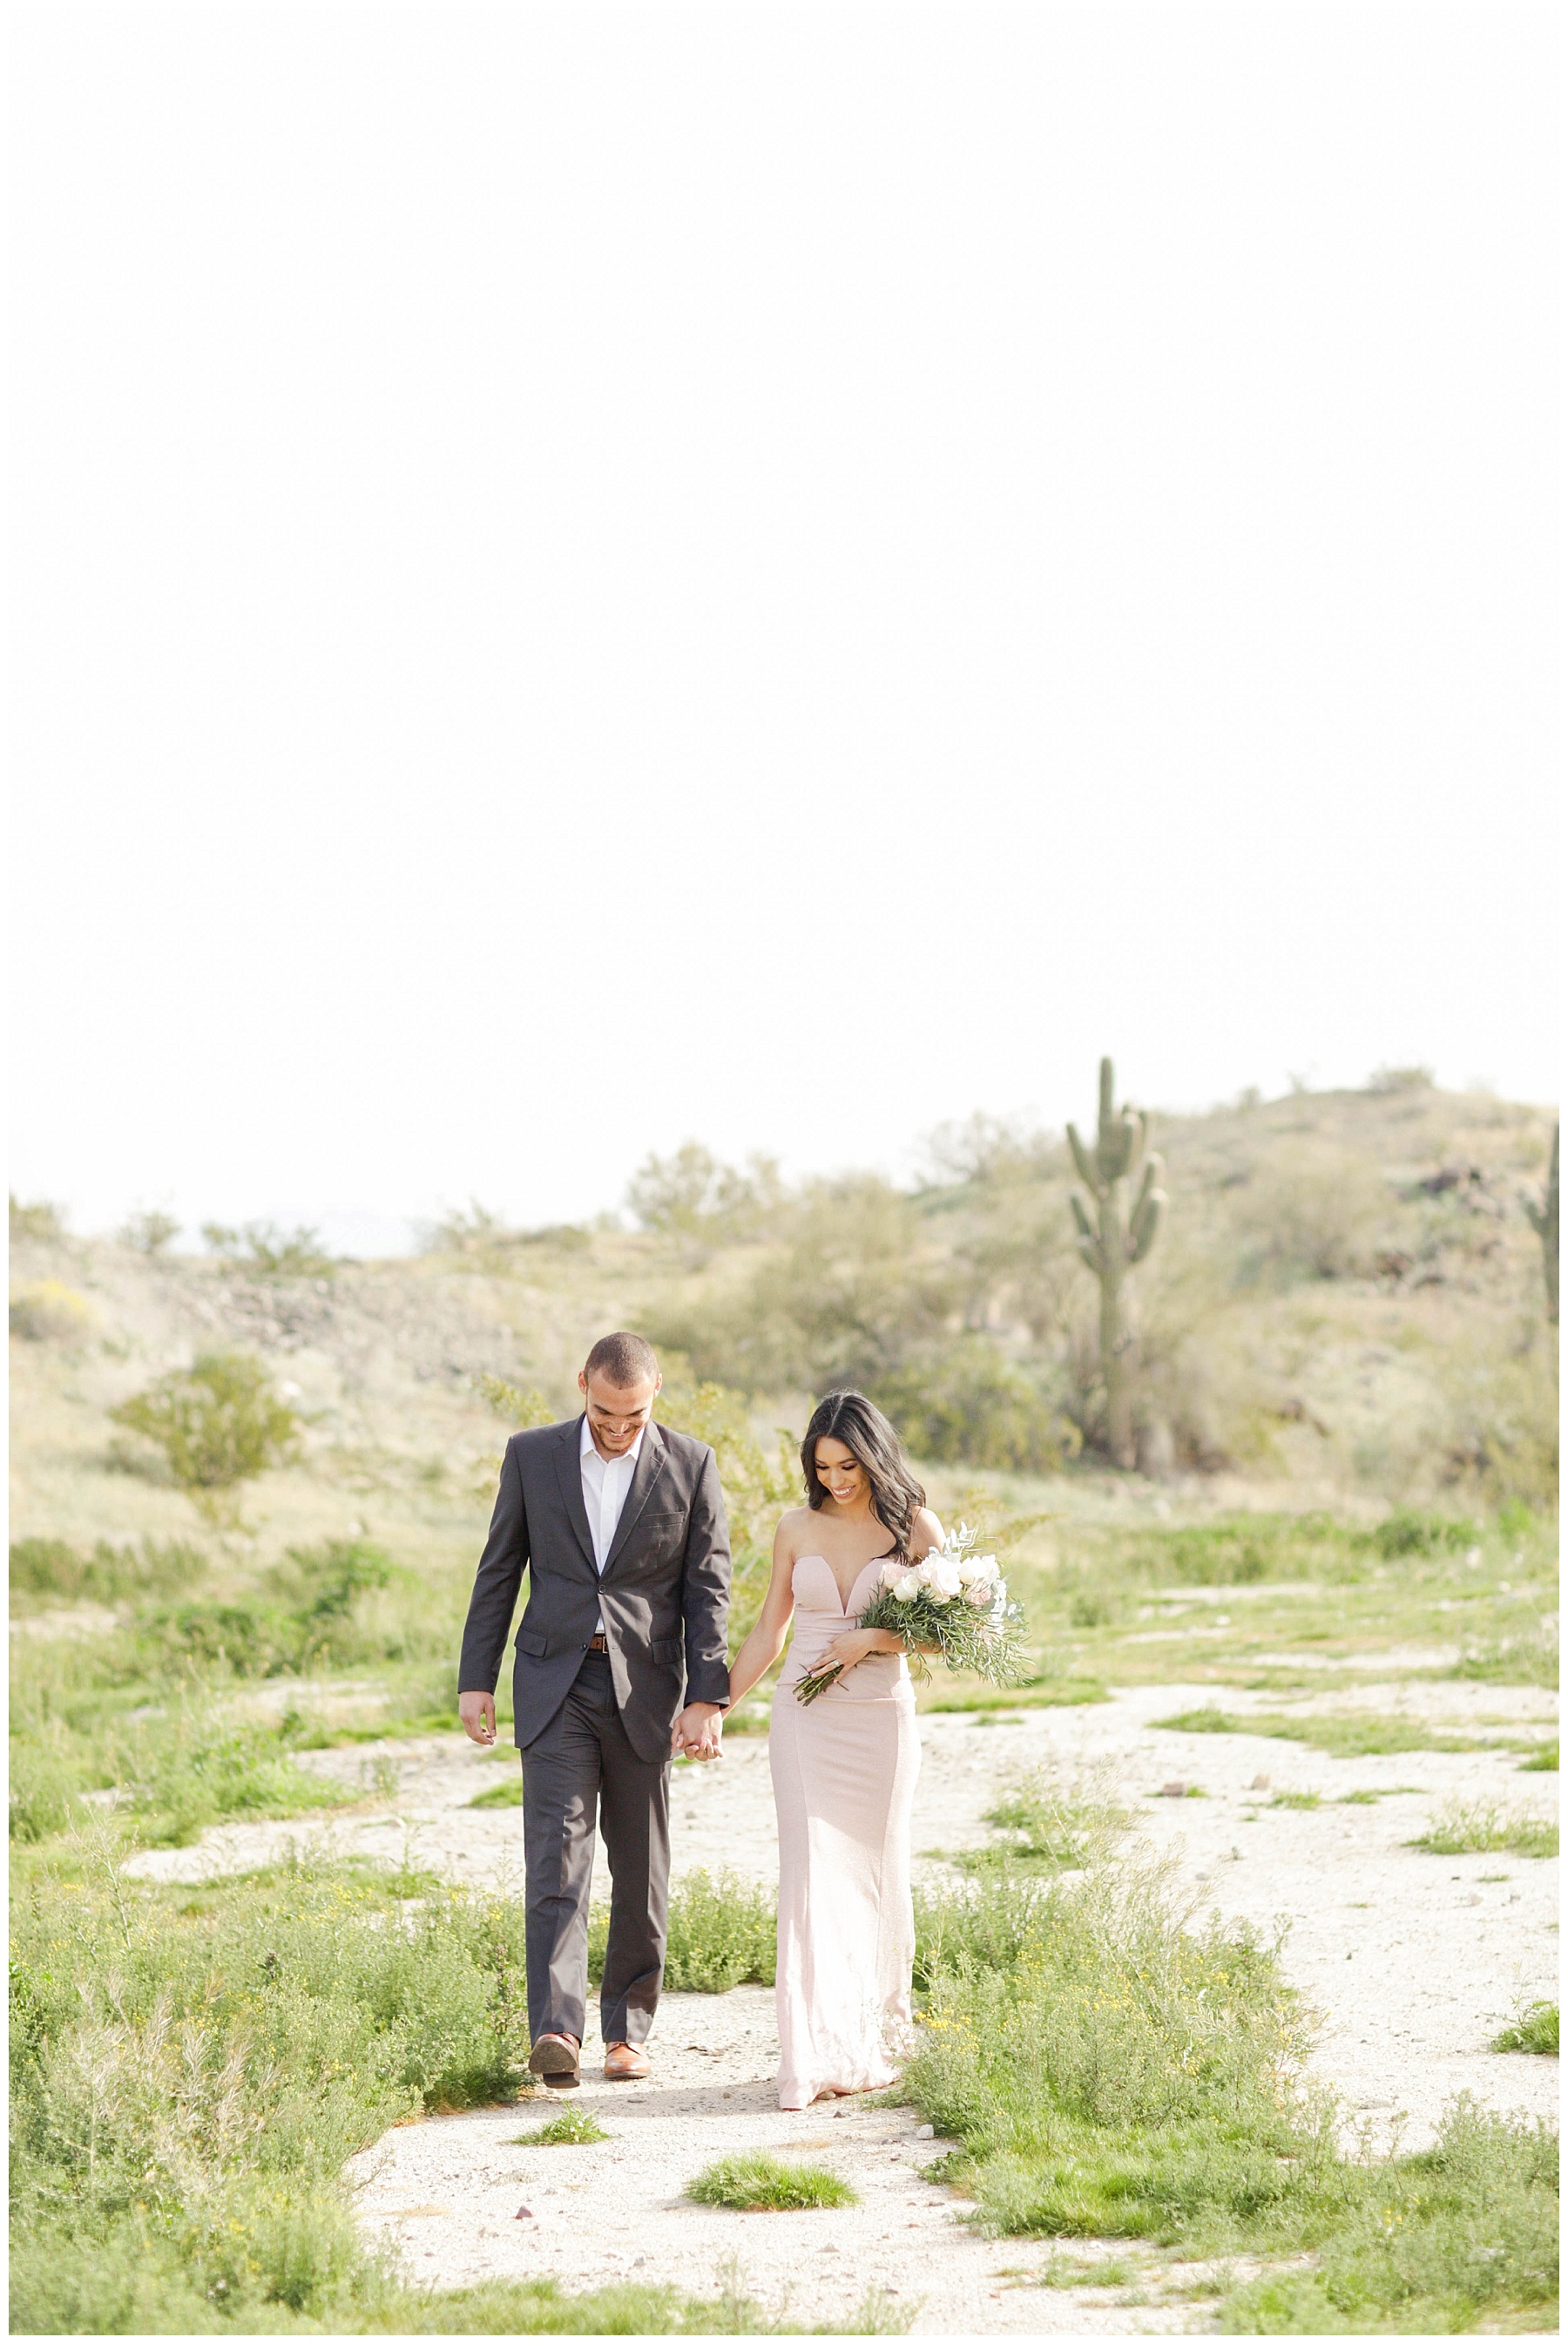 couples photography in phoenix, az, desert anniversary session at south mountain